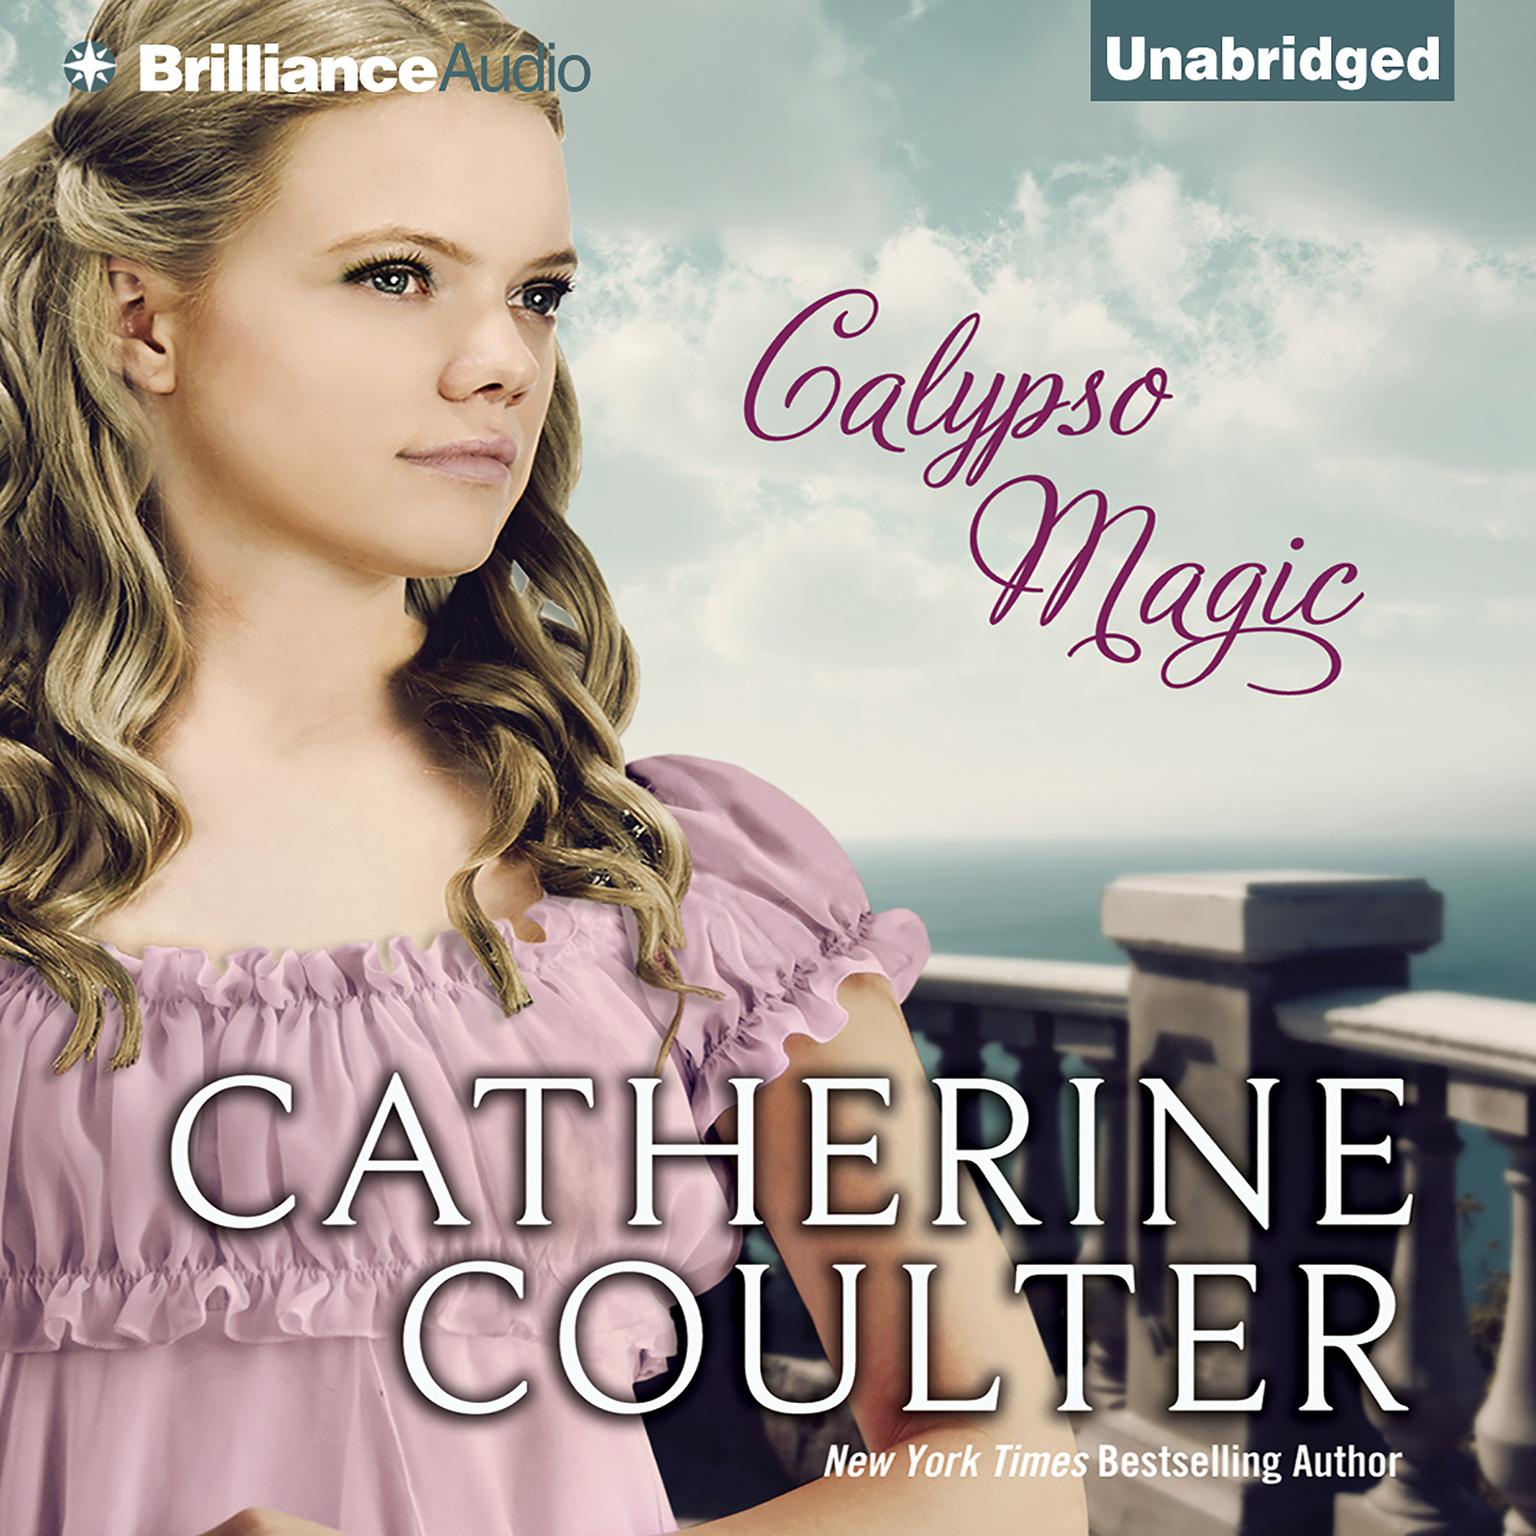 Calypso Magic Audiobook, by Catherine Coulter